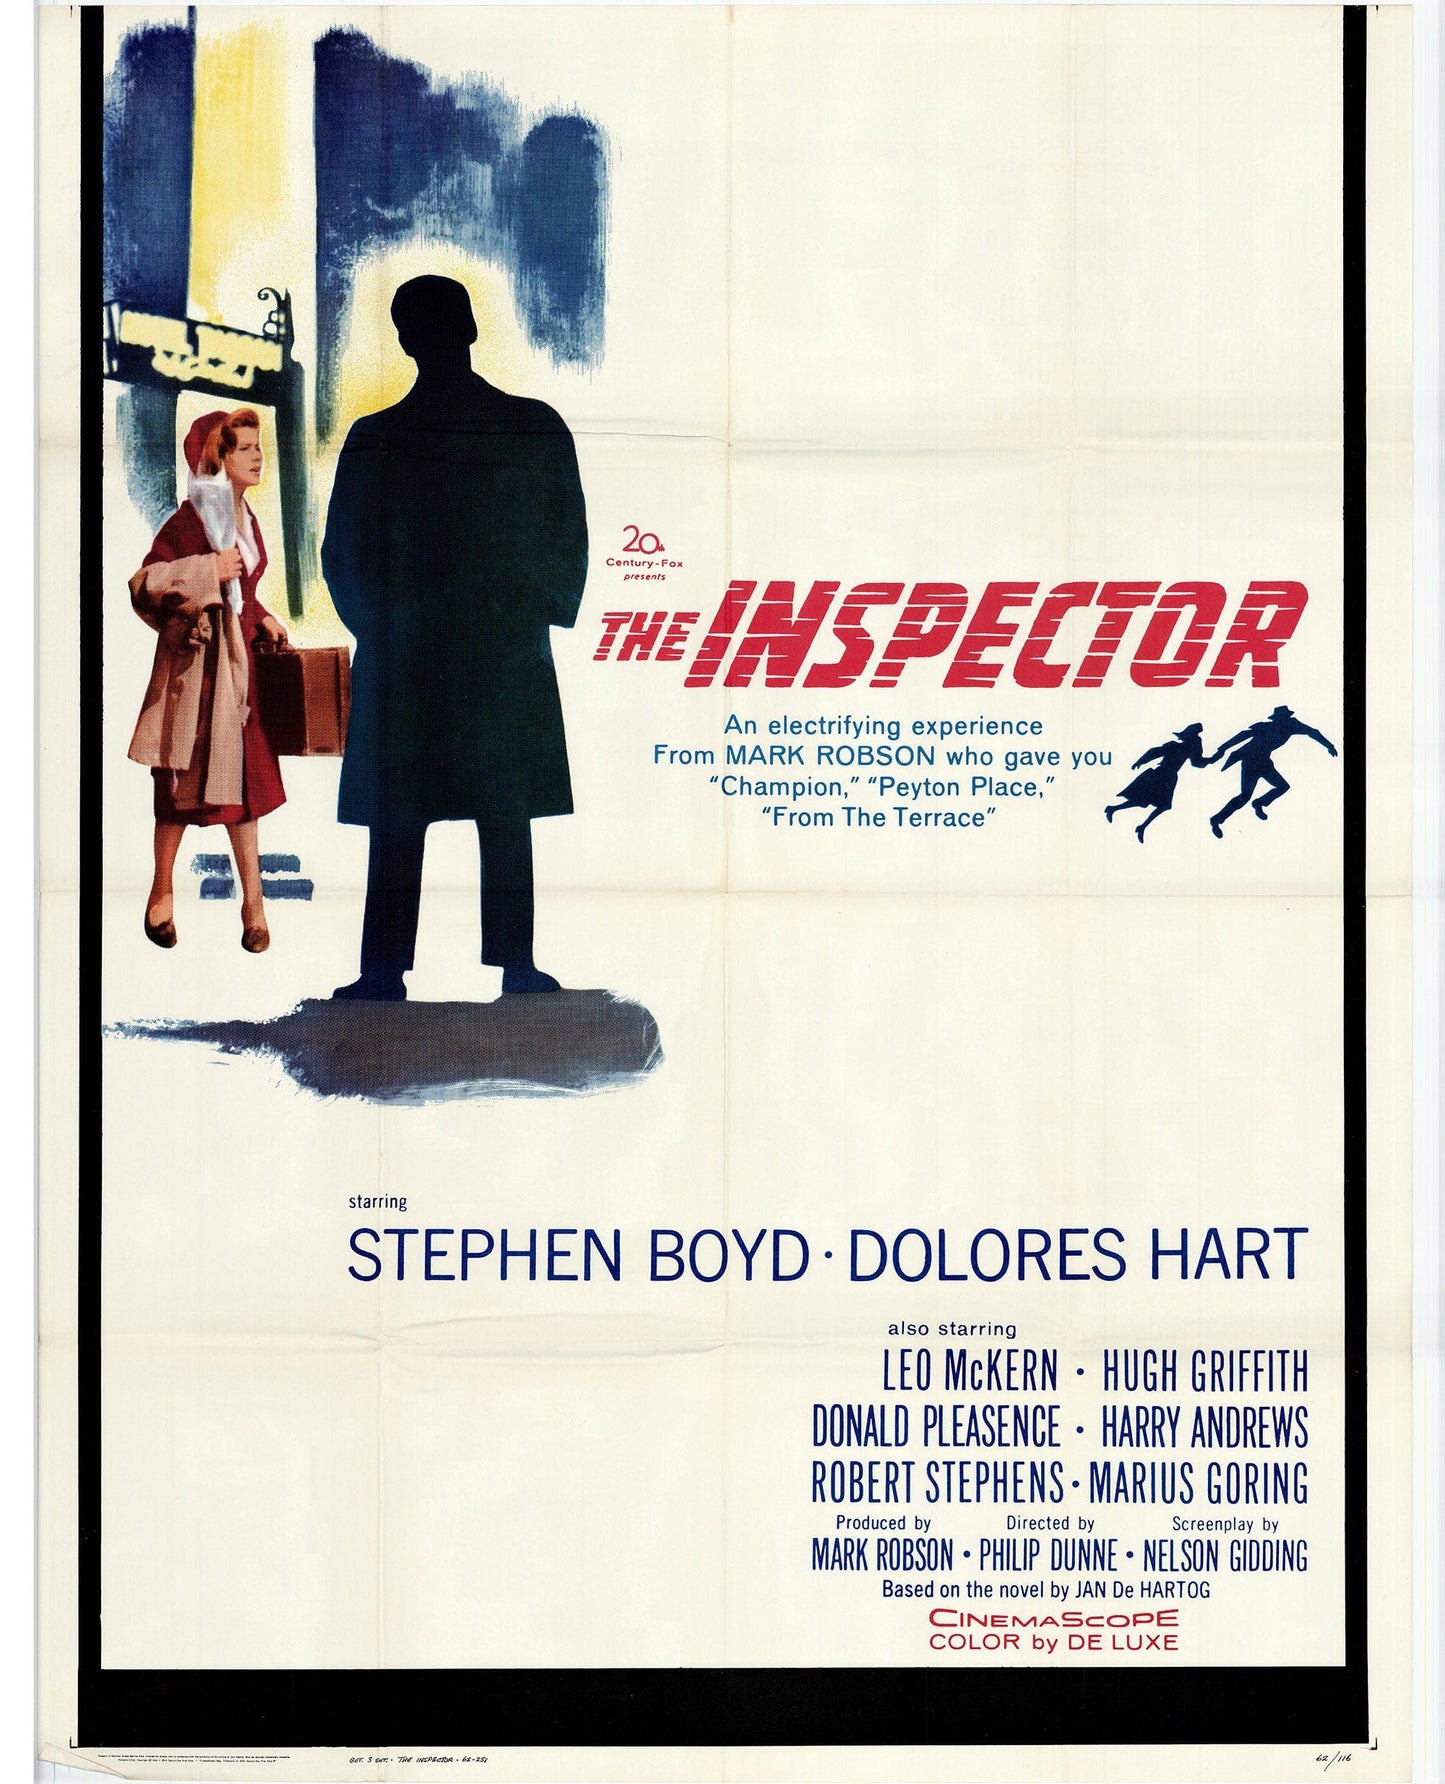 The Inspector - Classic 2 Panel Movie Poster